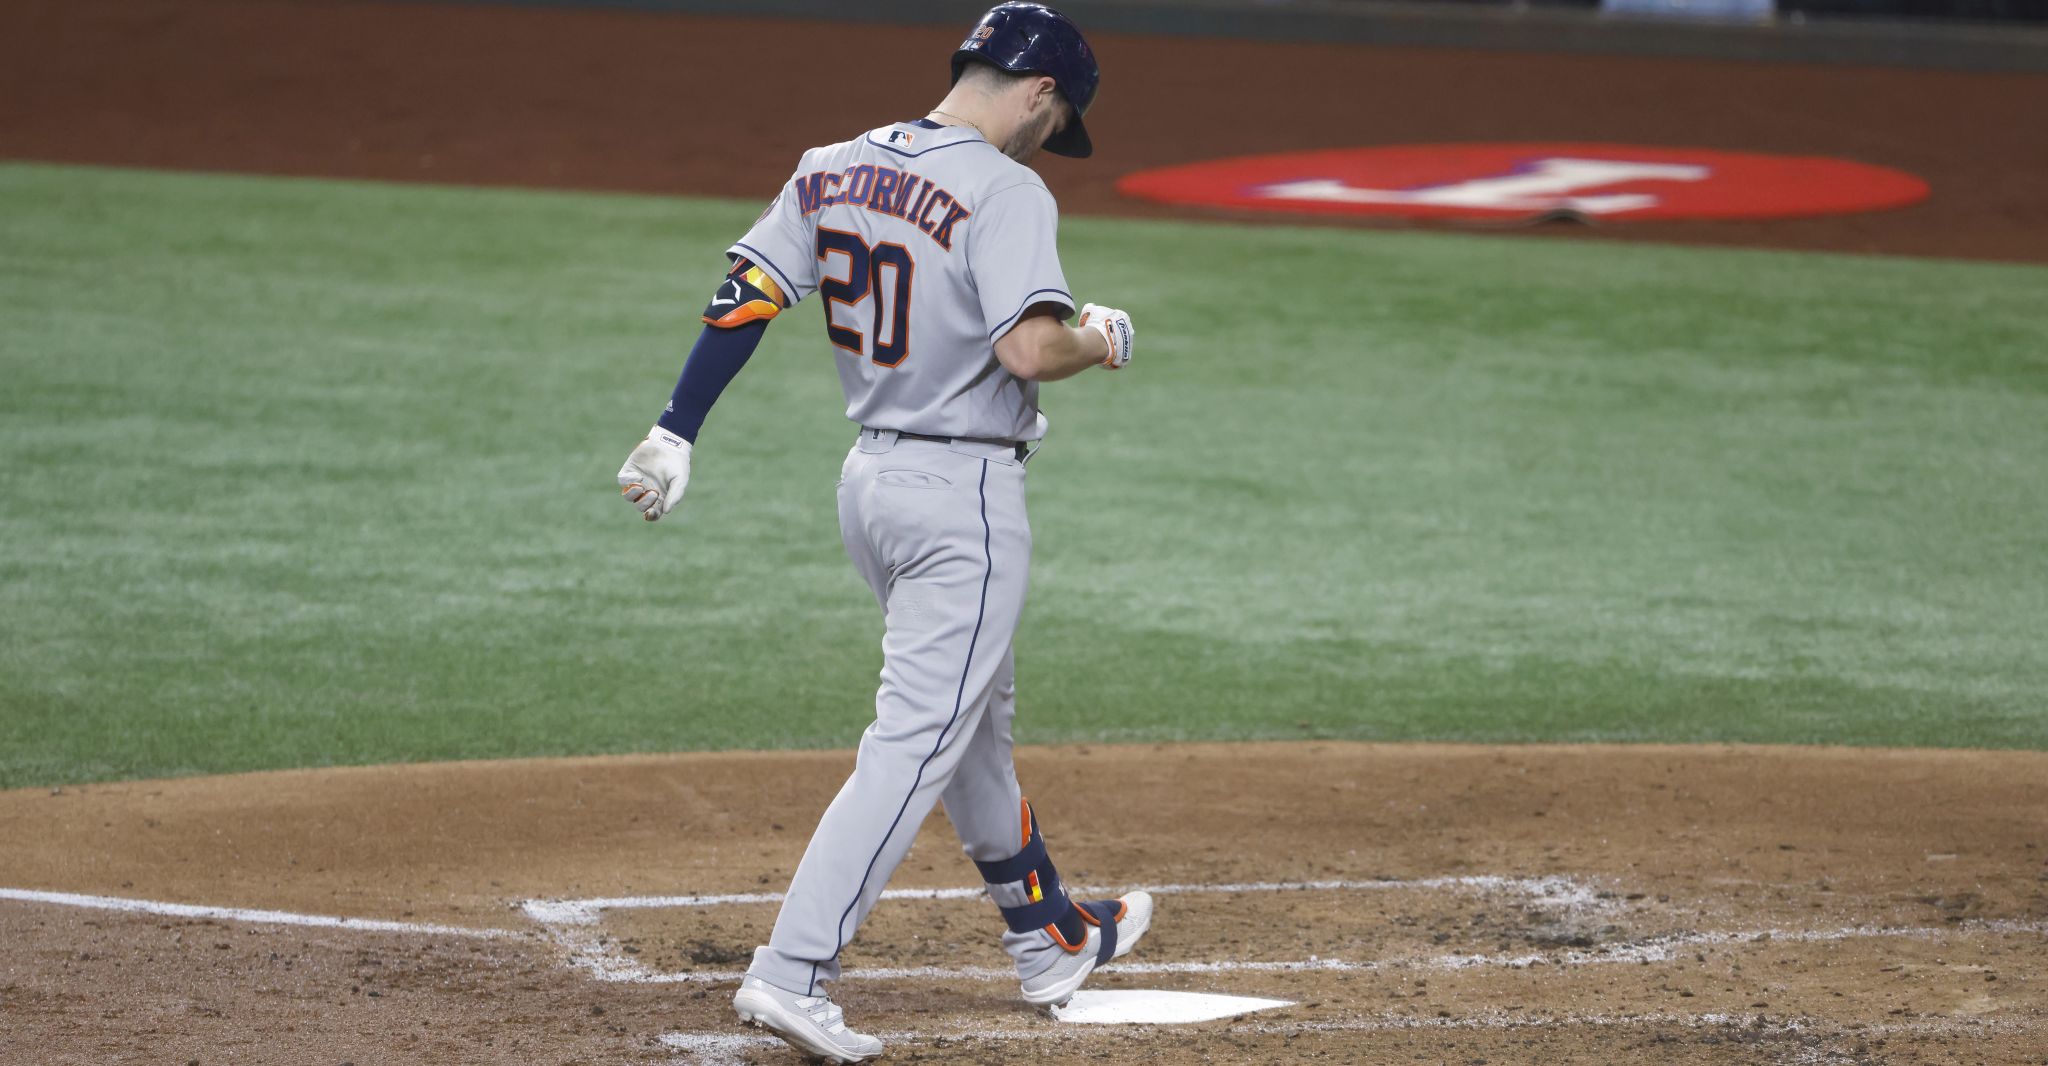 Astros insider: Chas McCormick deserves more playing time